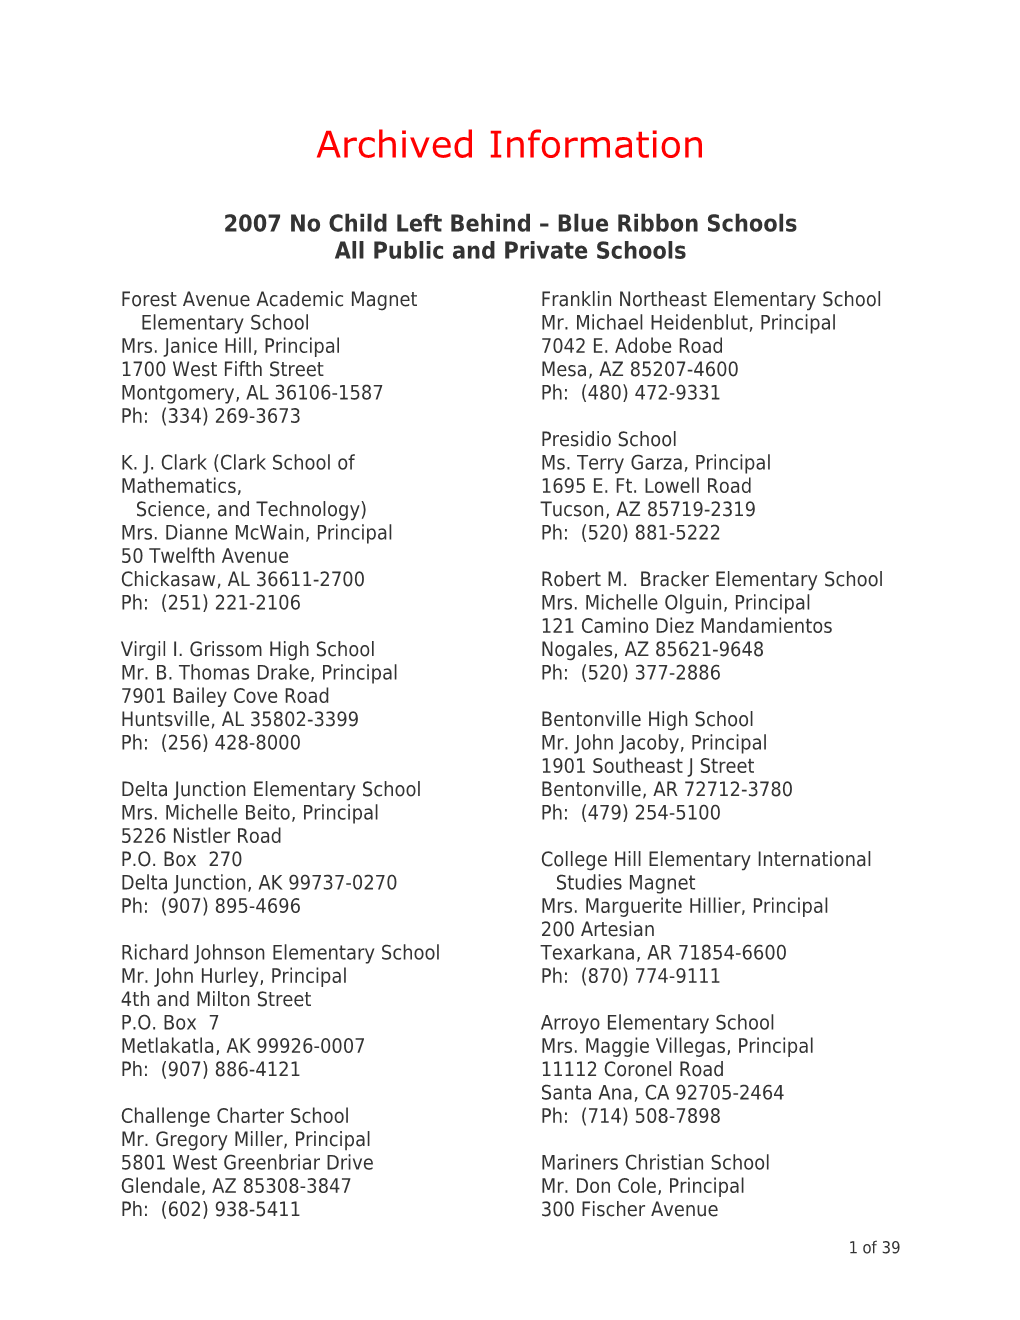 Archived: 2007 NCLB-Blue Ribbon Schools: List of All Schools with Principals' Names December